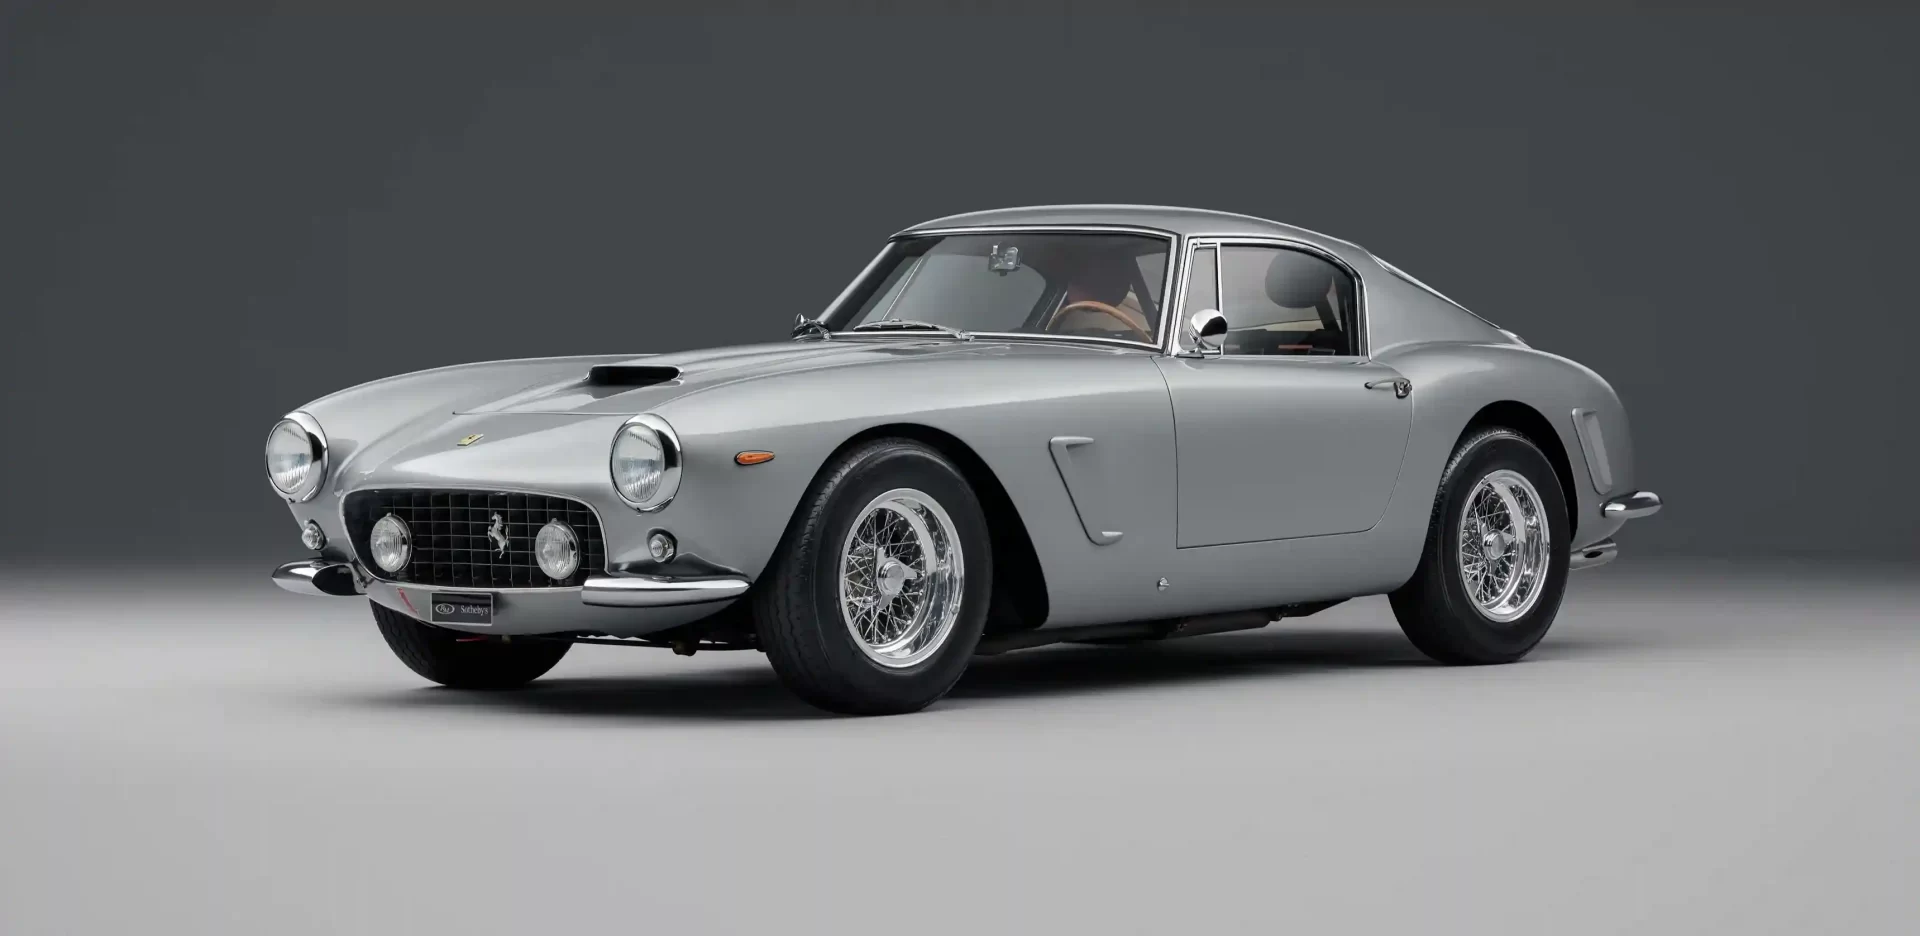 A 1960 Ferrari 250 GT SWB Berlinetta, a rare classic designed by Sergio Scaglietti, is set for auction in Taplow, Berkshire, estimated between £5,000,000 and £6,000,000.